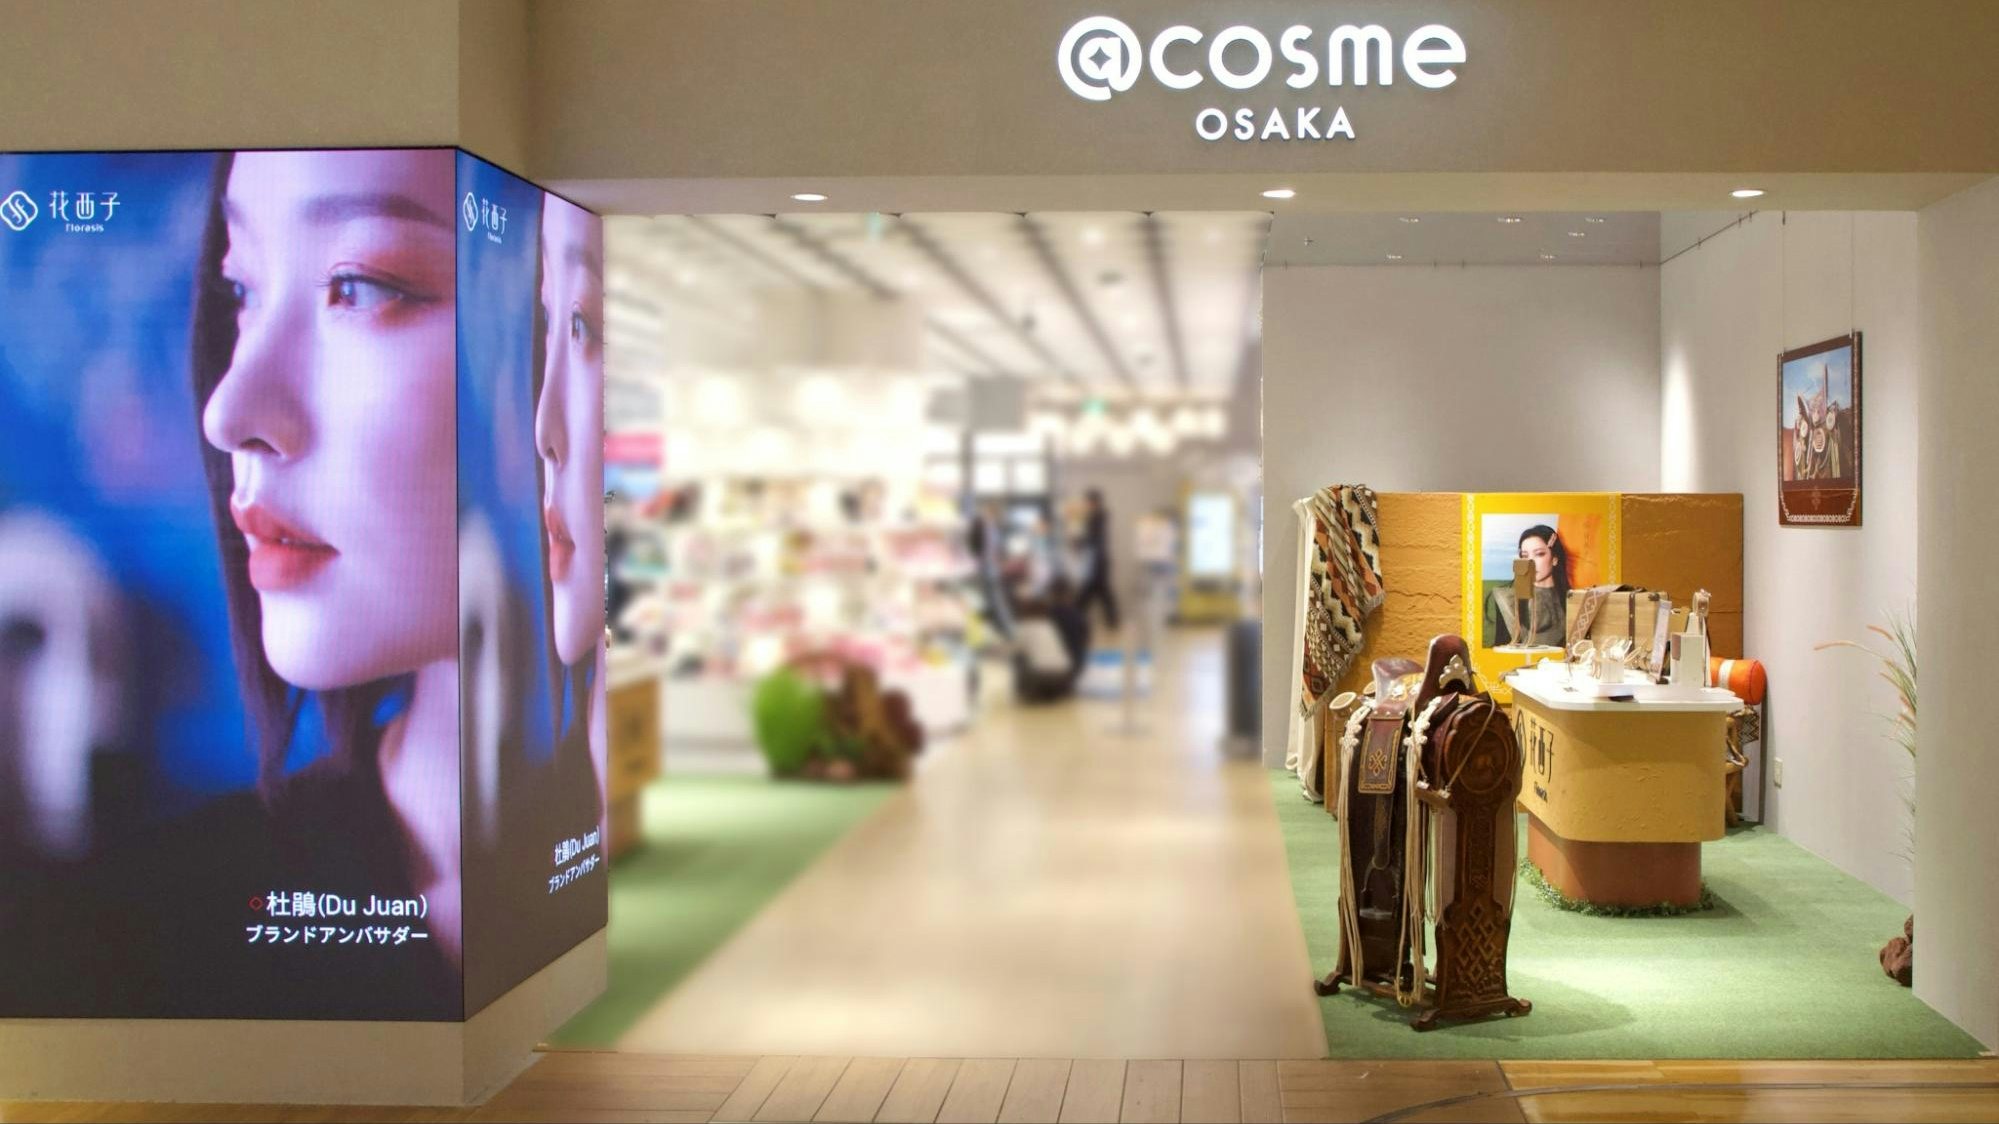 Florasis today launched its “Nomadic Glam” collection in Japan with an exclusive pop-up store at @cosme Osaka. 